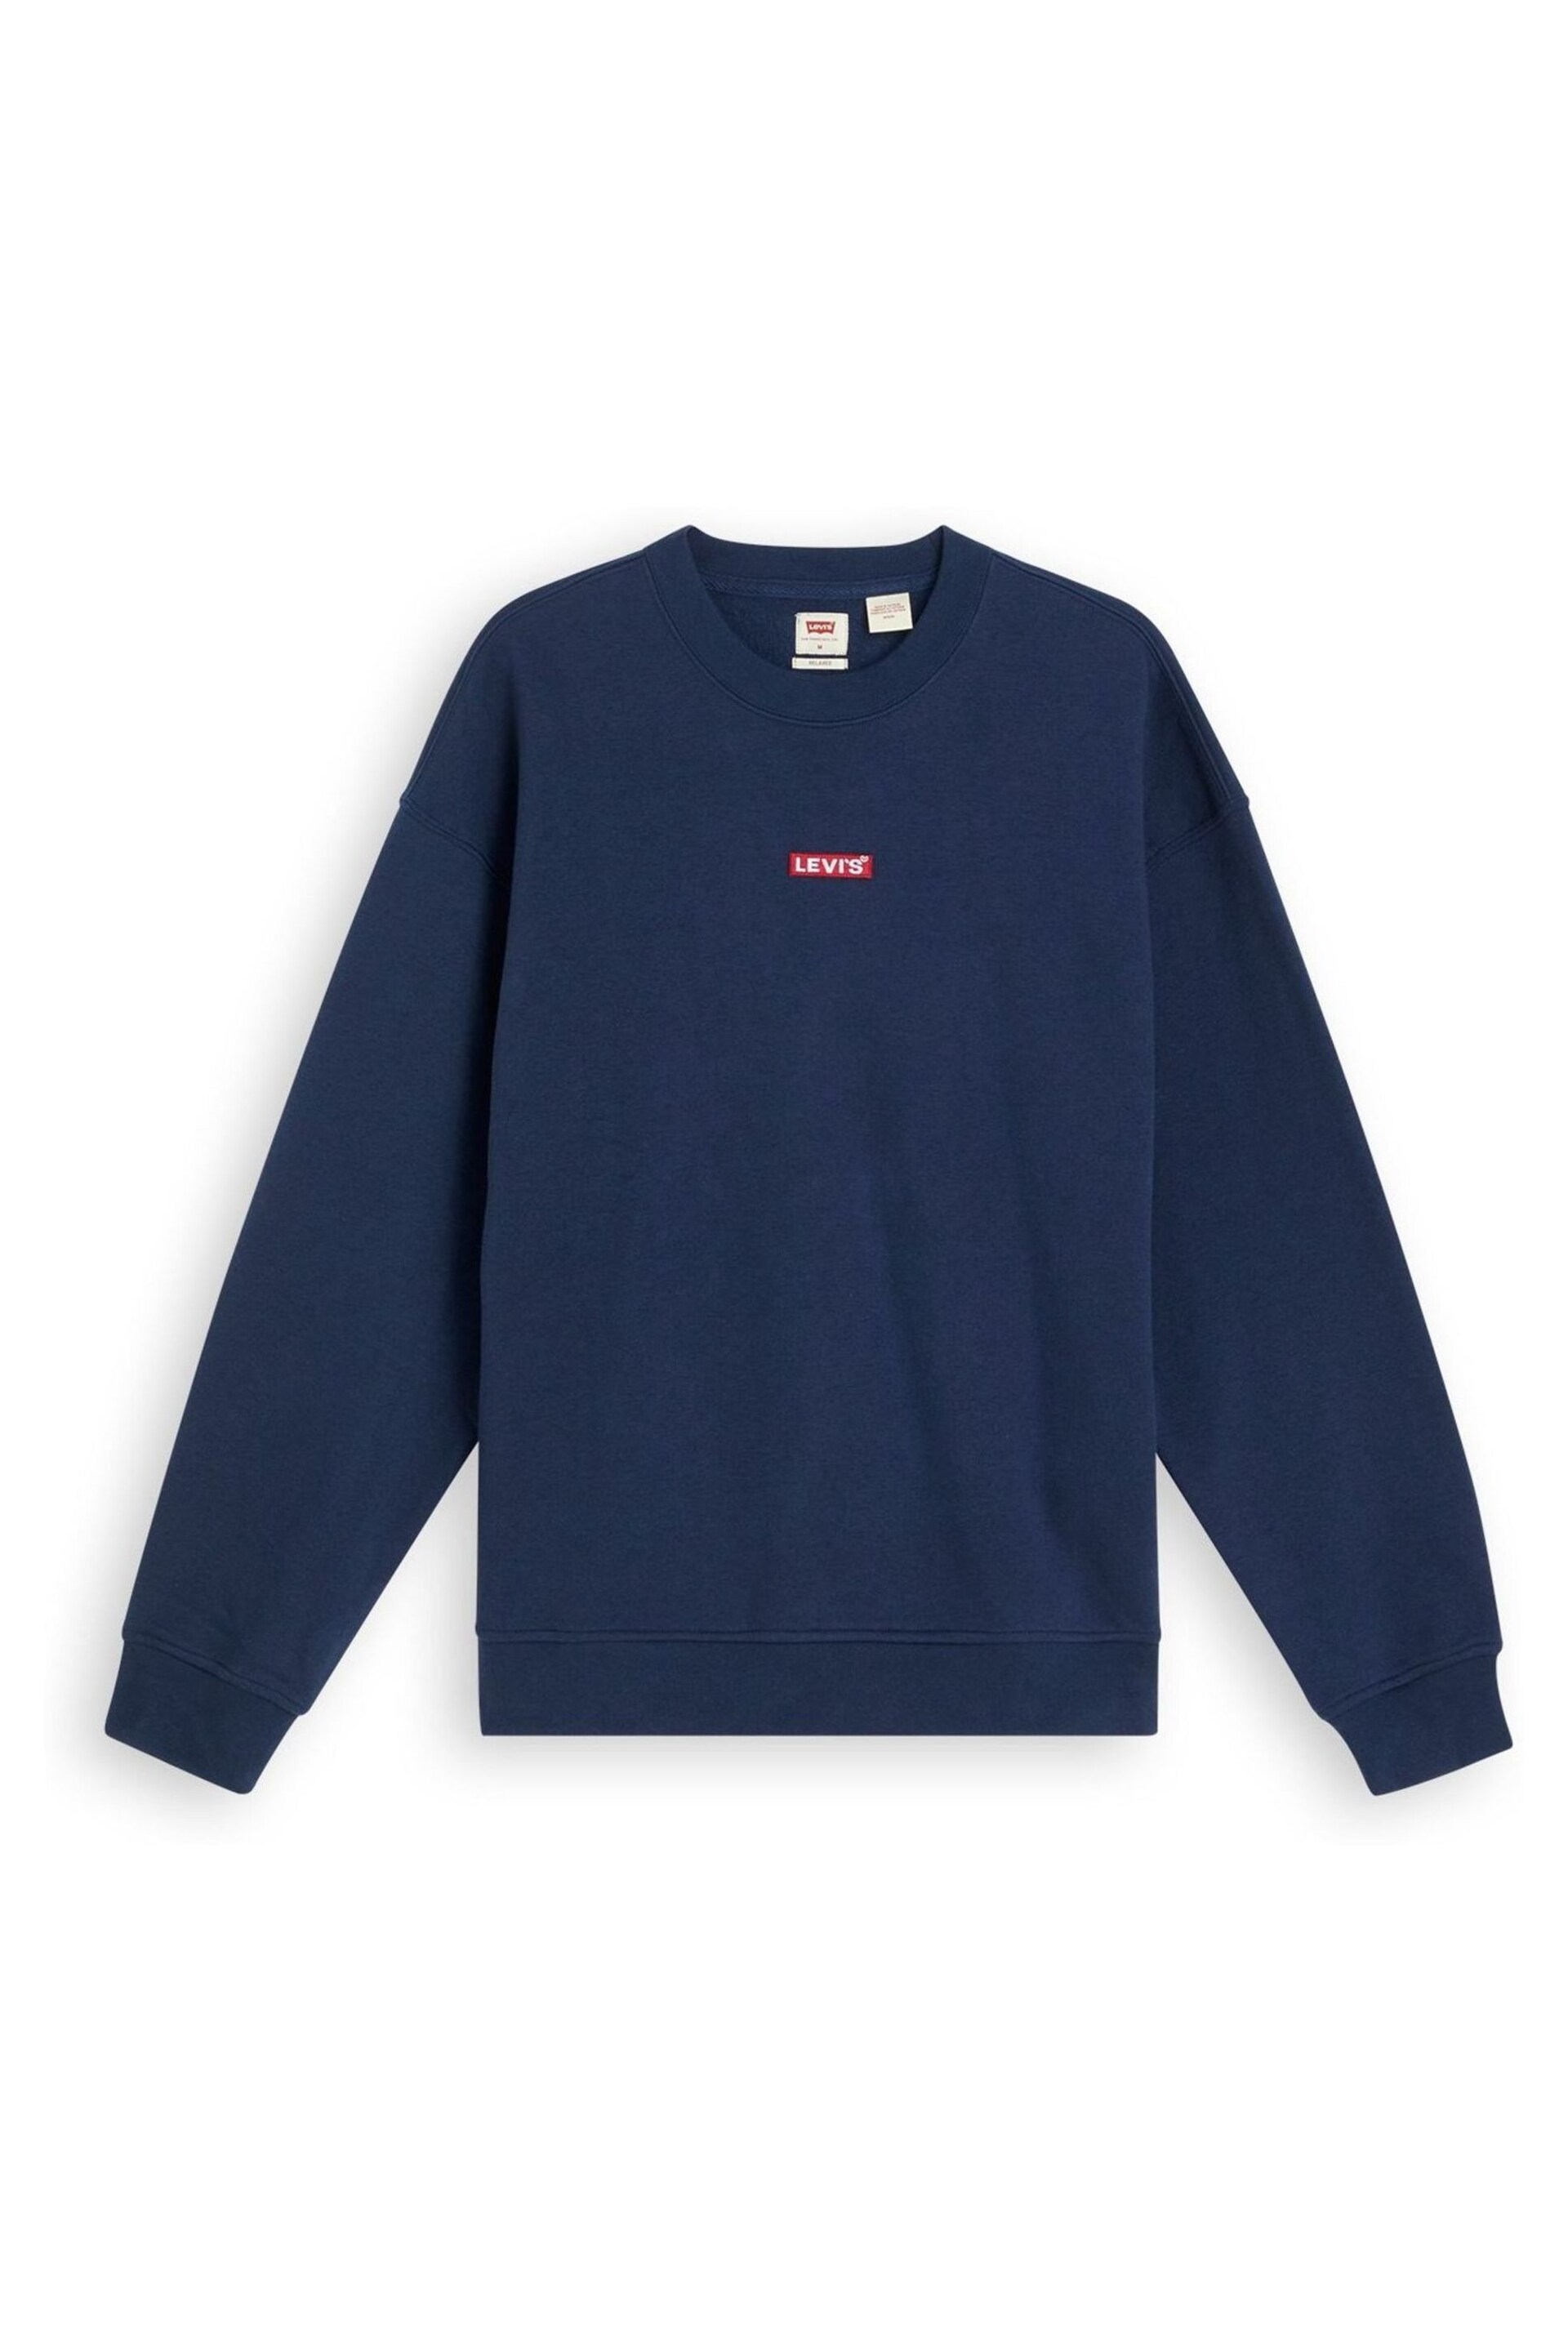 Levi's® Blue Relaxed Baby Tab  Sweatshirt - Image 3 of 5